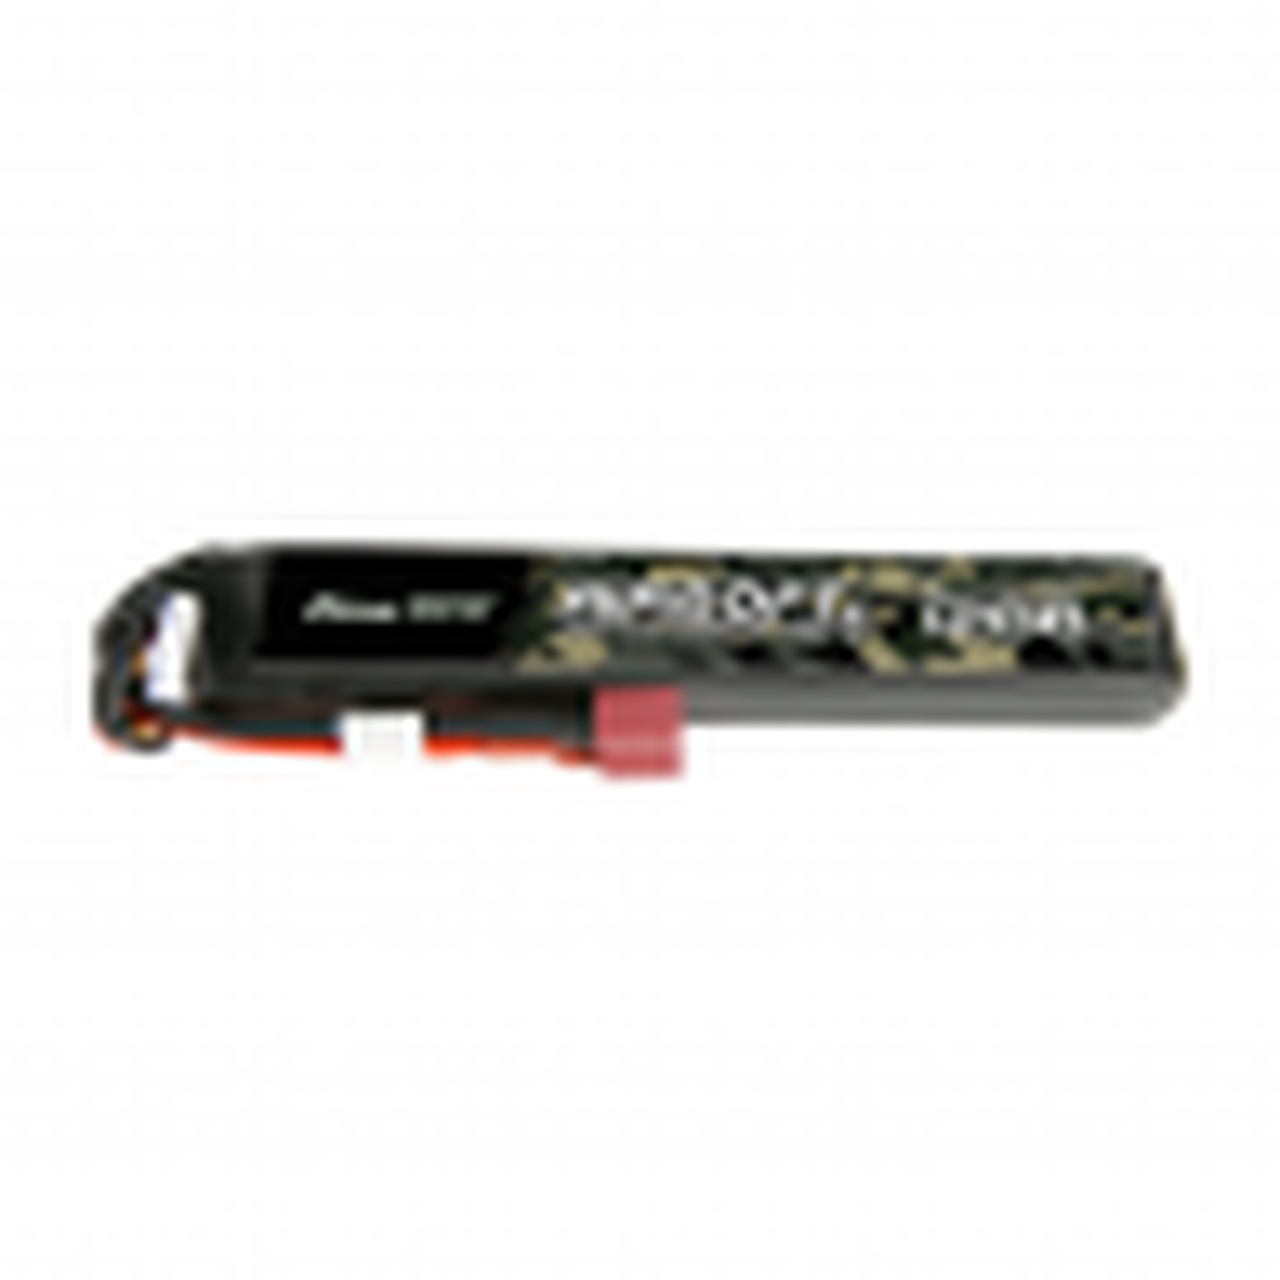 Gens ace 25C 1200mAh 3S1P 11.1V Airsoft Gun Battery with Dean Plug-New Packaging